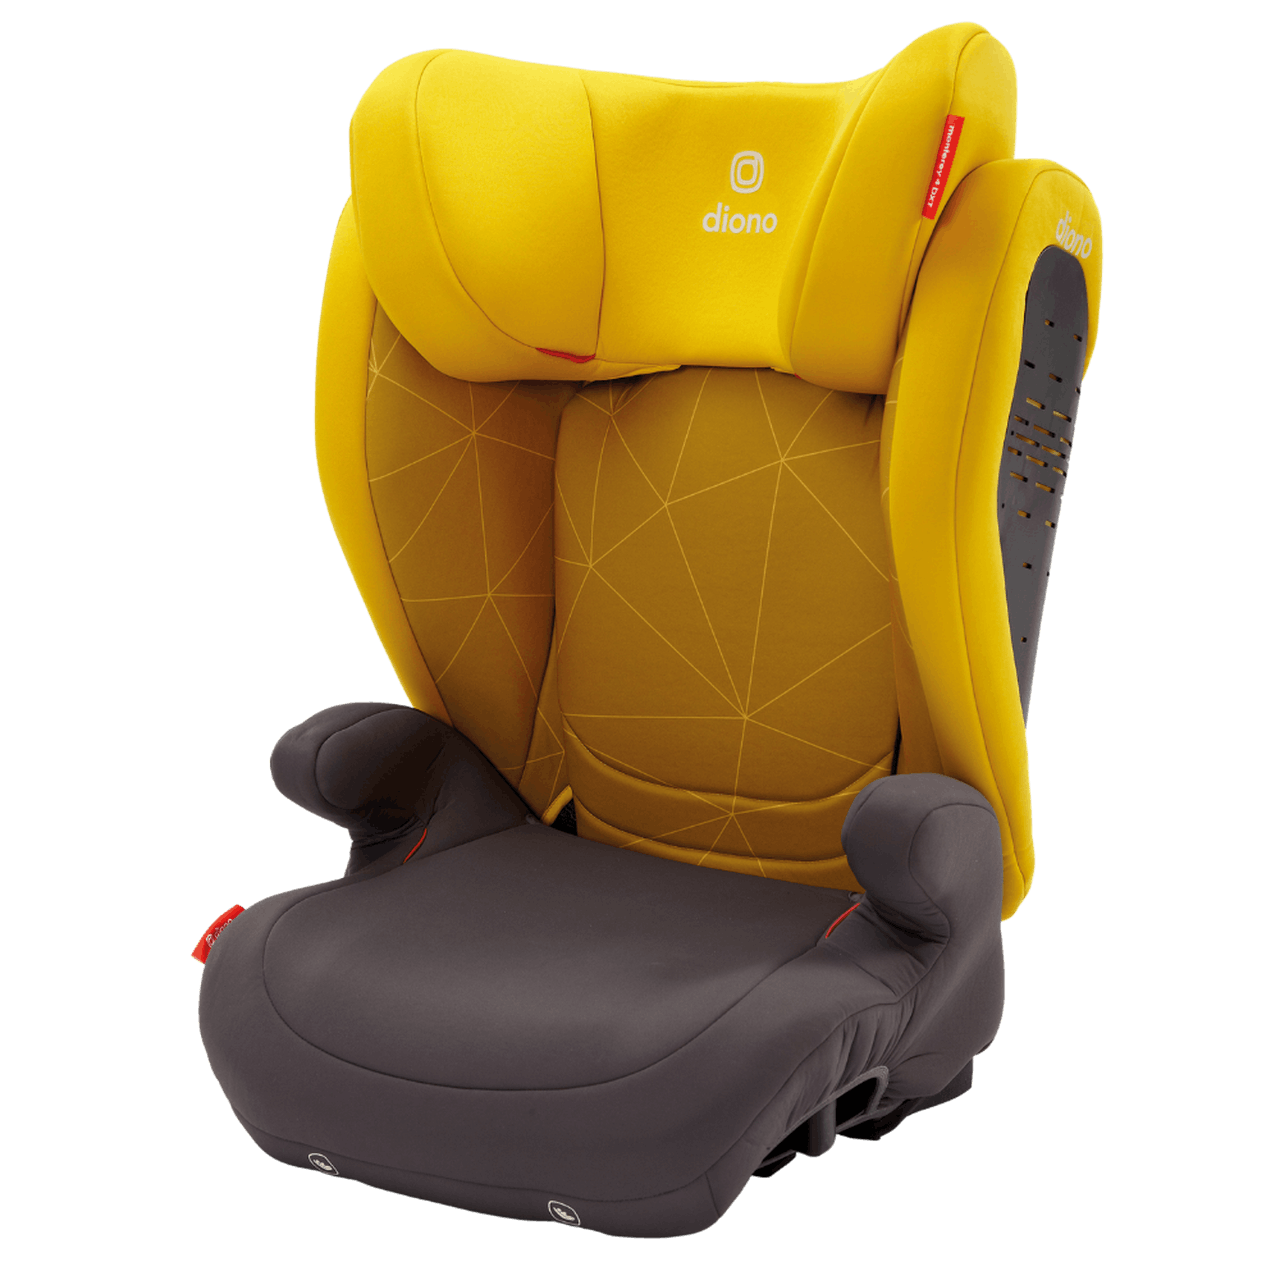 Diono Monterey 4DXT 2-in-1 Latch Expandable Belt Positioning Booster Car Seat